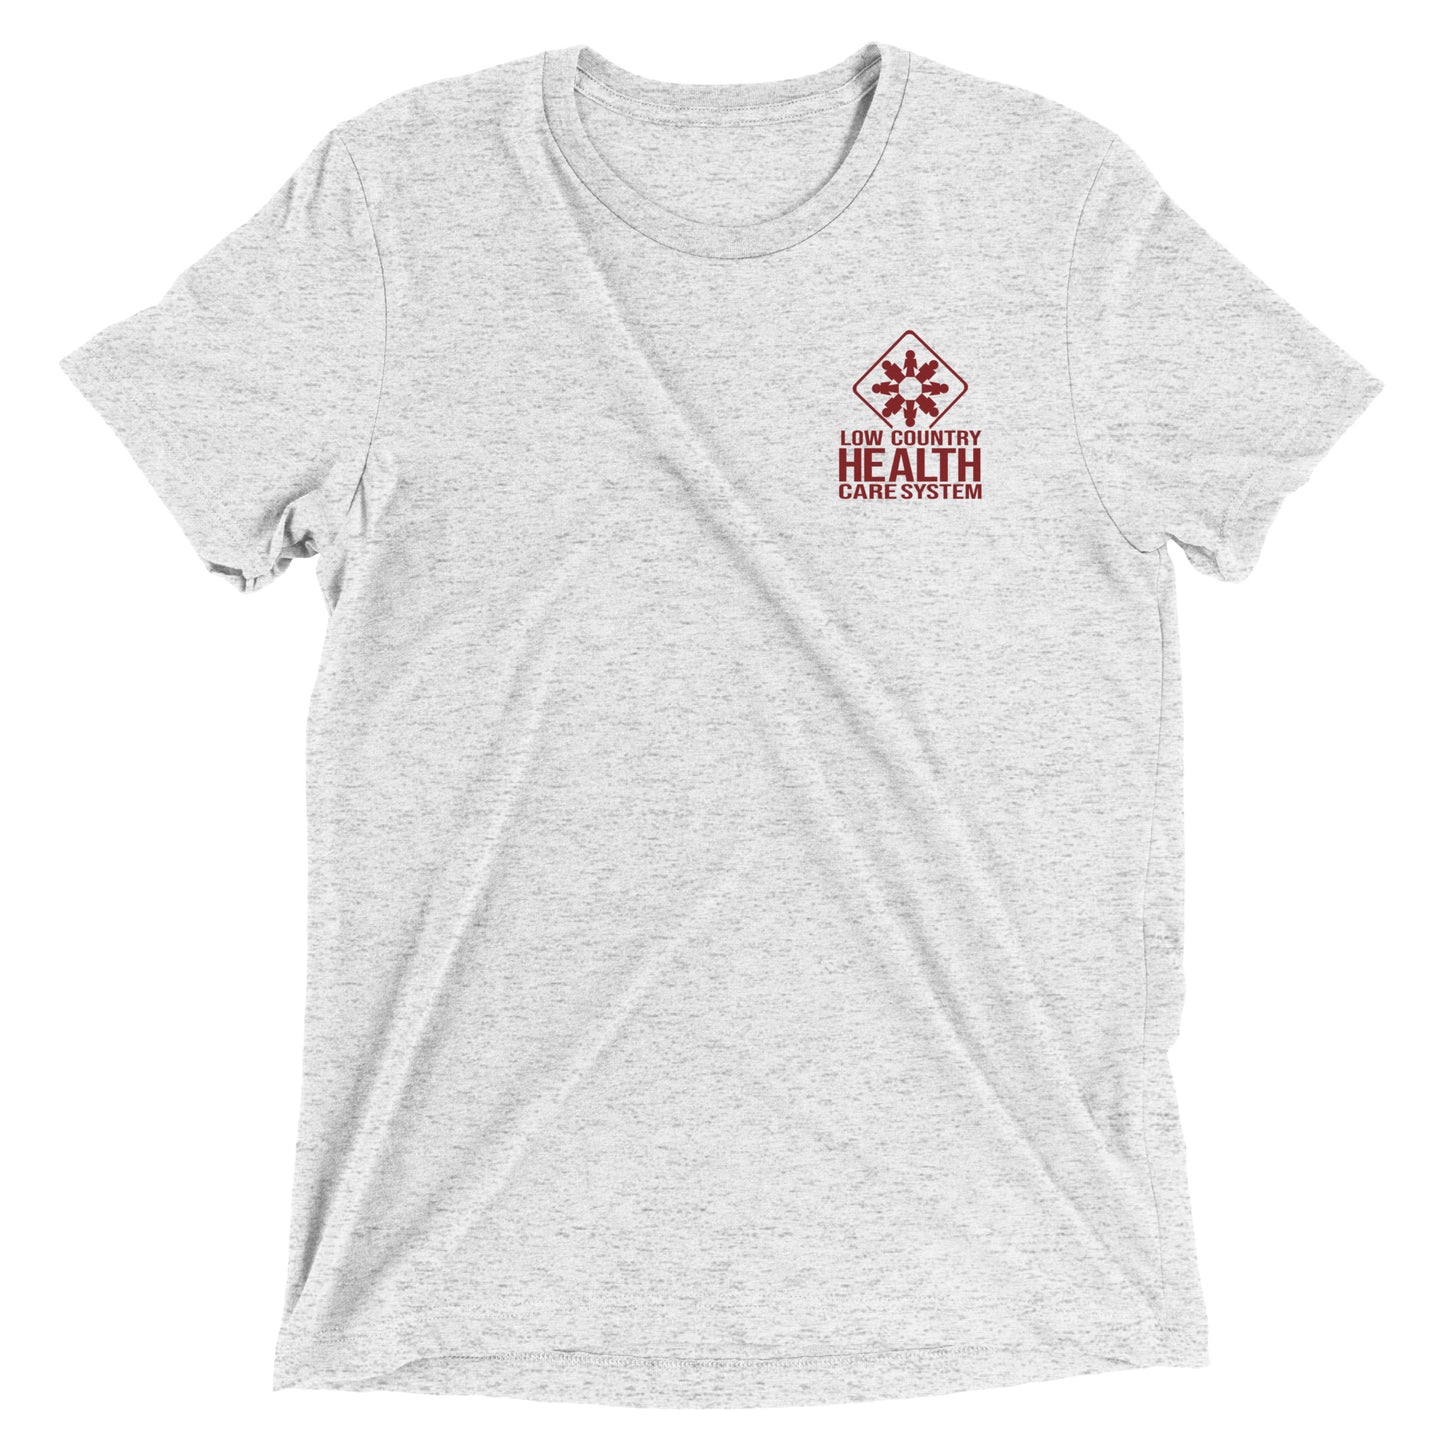 Extra-soft Triblend T-shirt (double sided print)